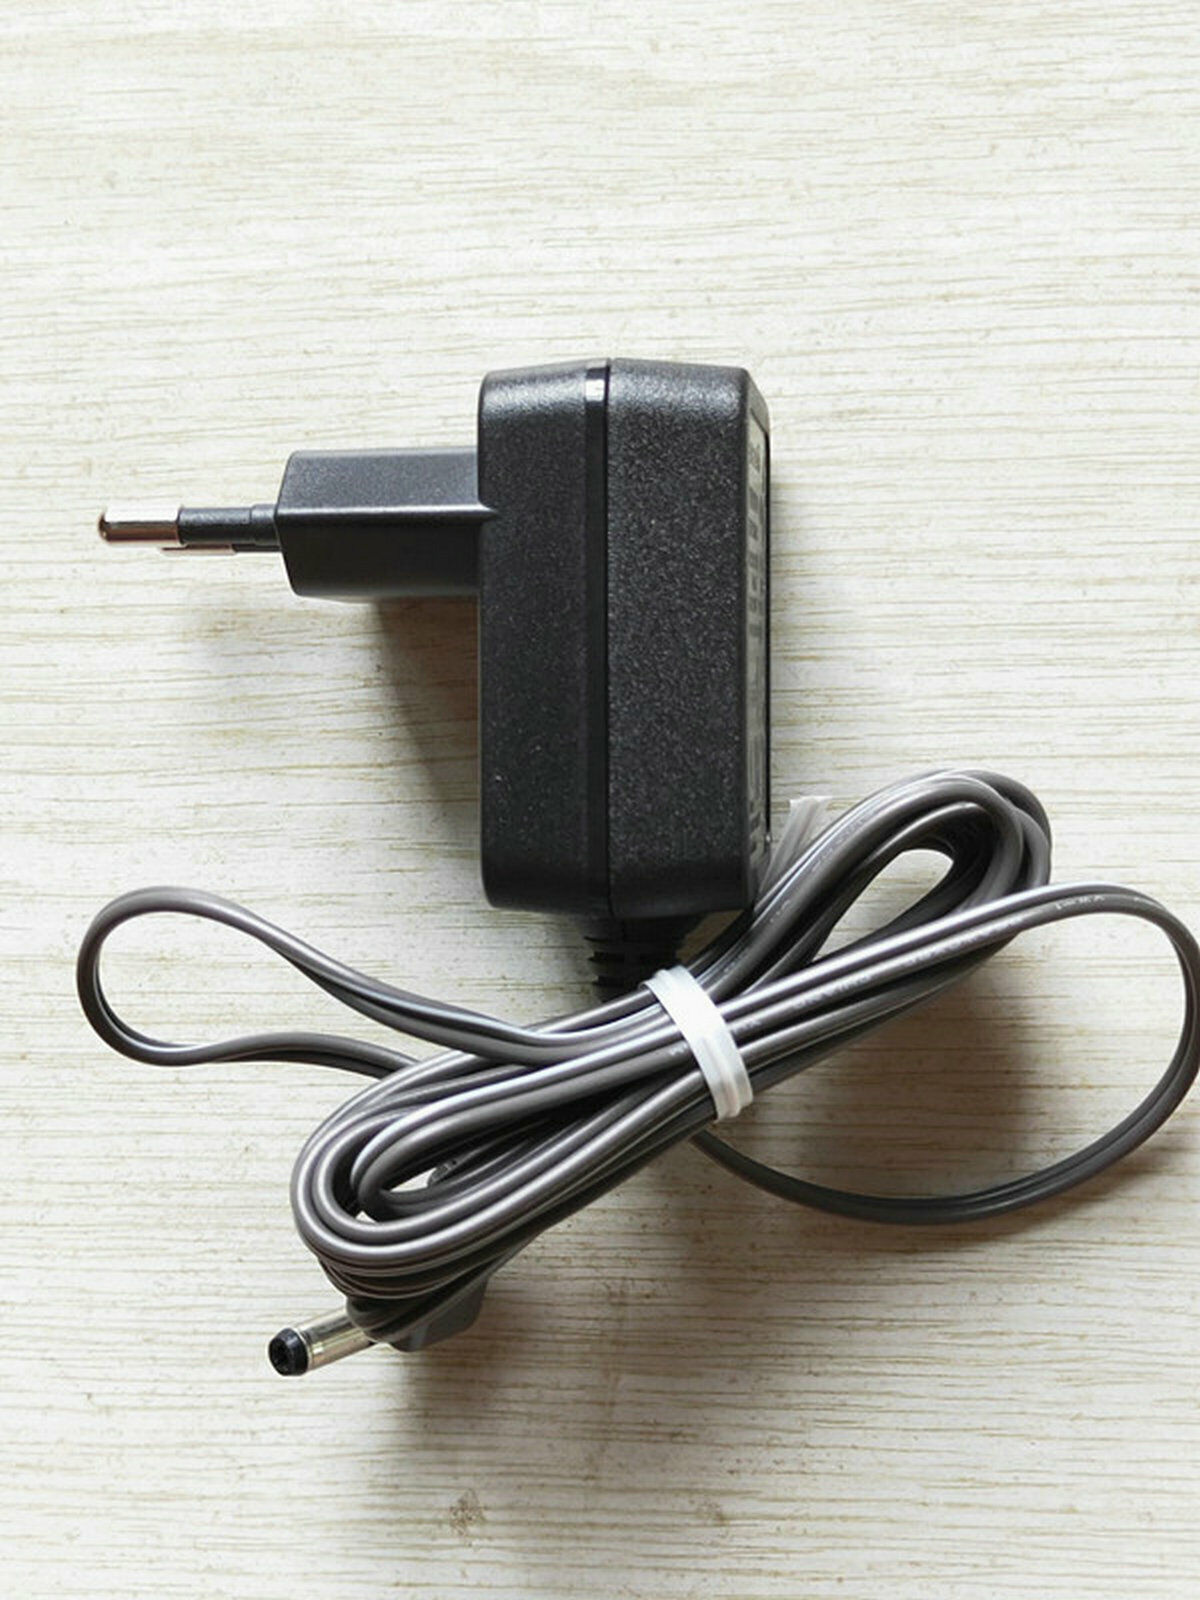 Replacement for Segway Ninebot Charger 42V 1.7A Fit for Ninebot Segway Scooter Charger ES2/ES4/E22/ES1L ES Series KickSc